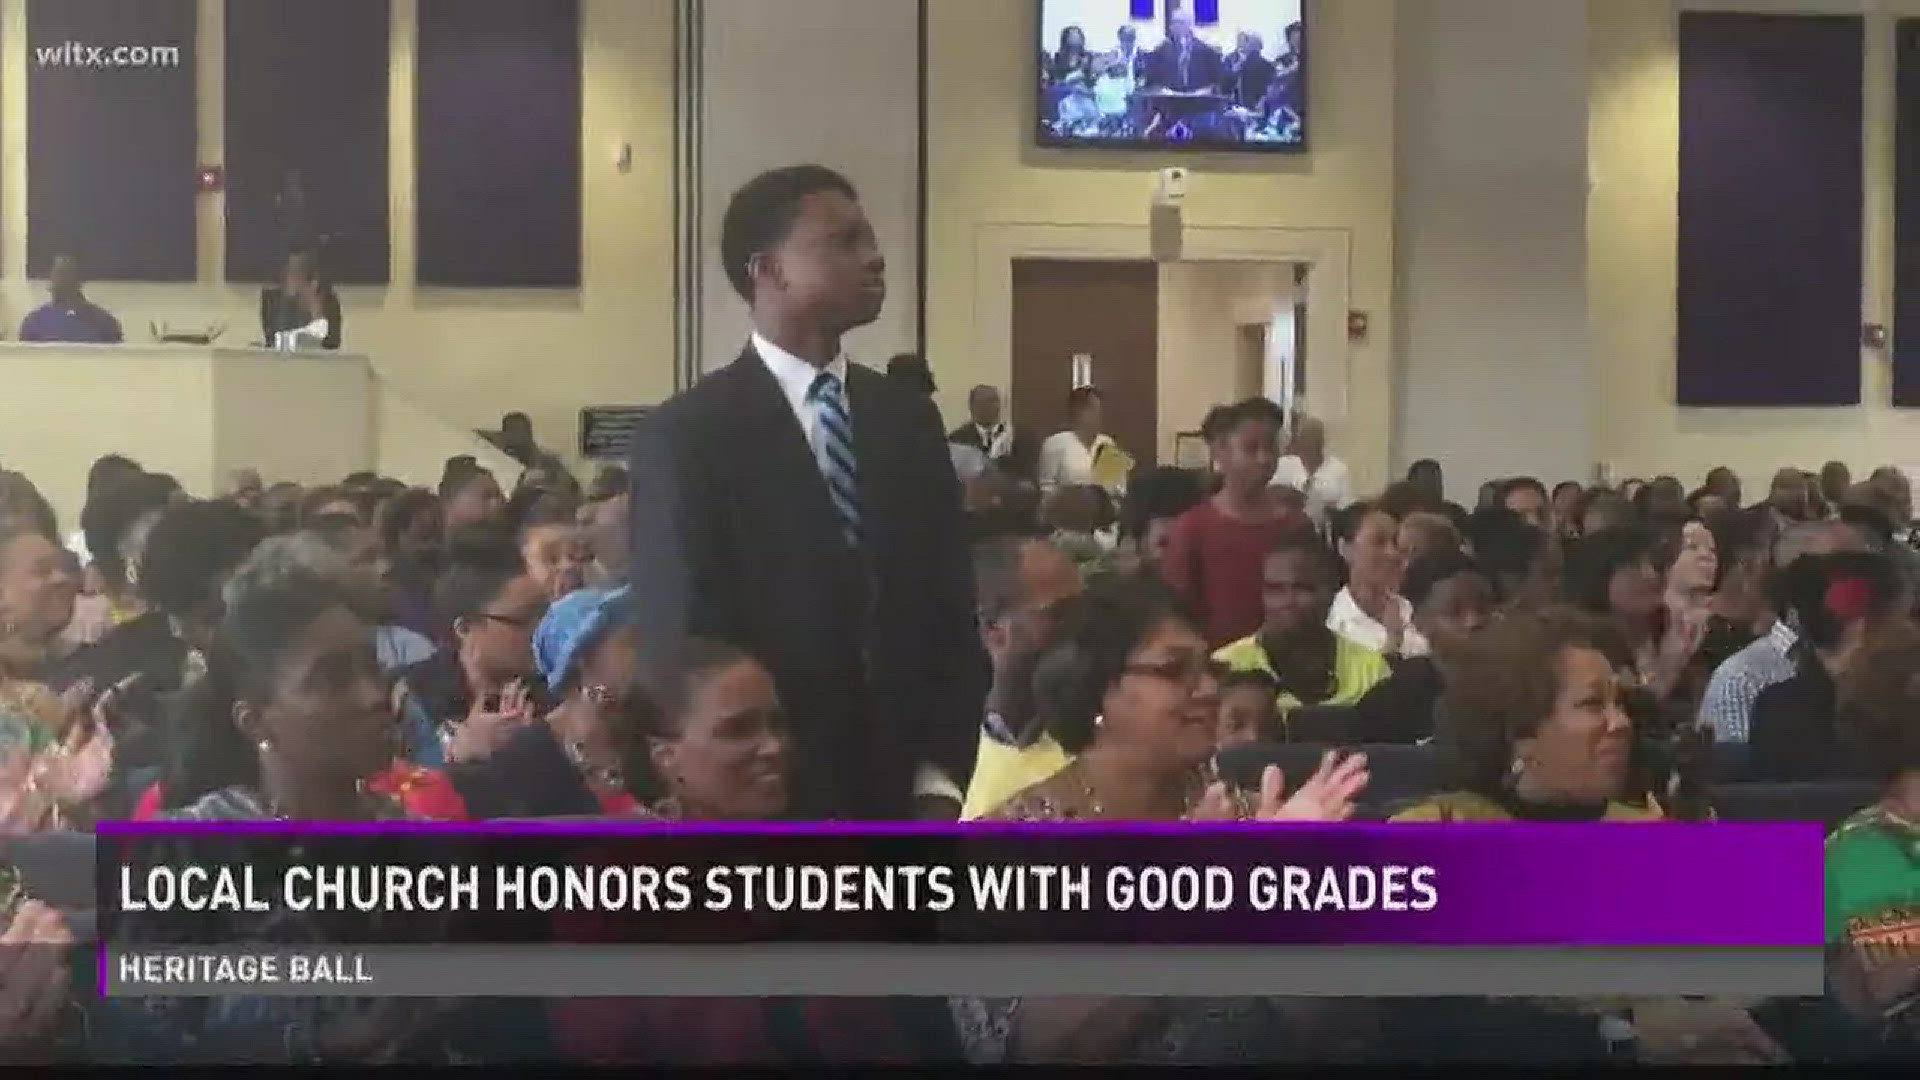 A local church honored students who received good grades.